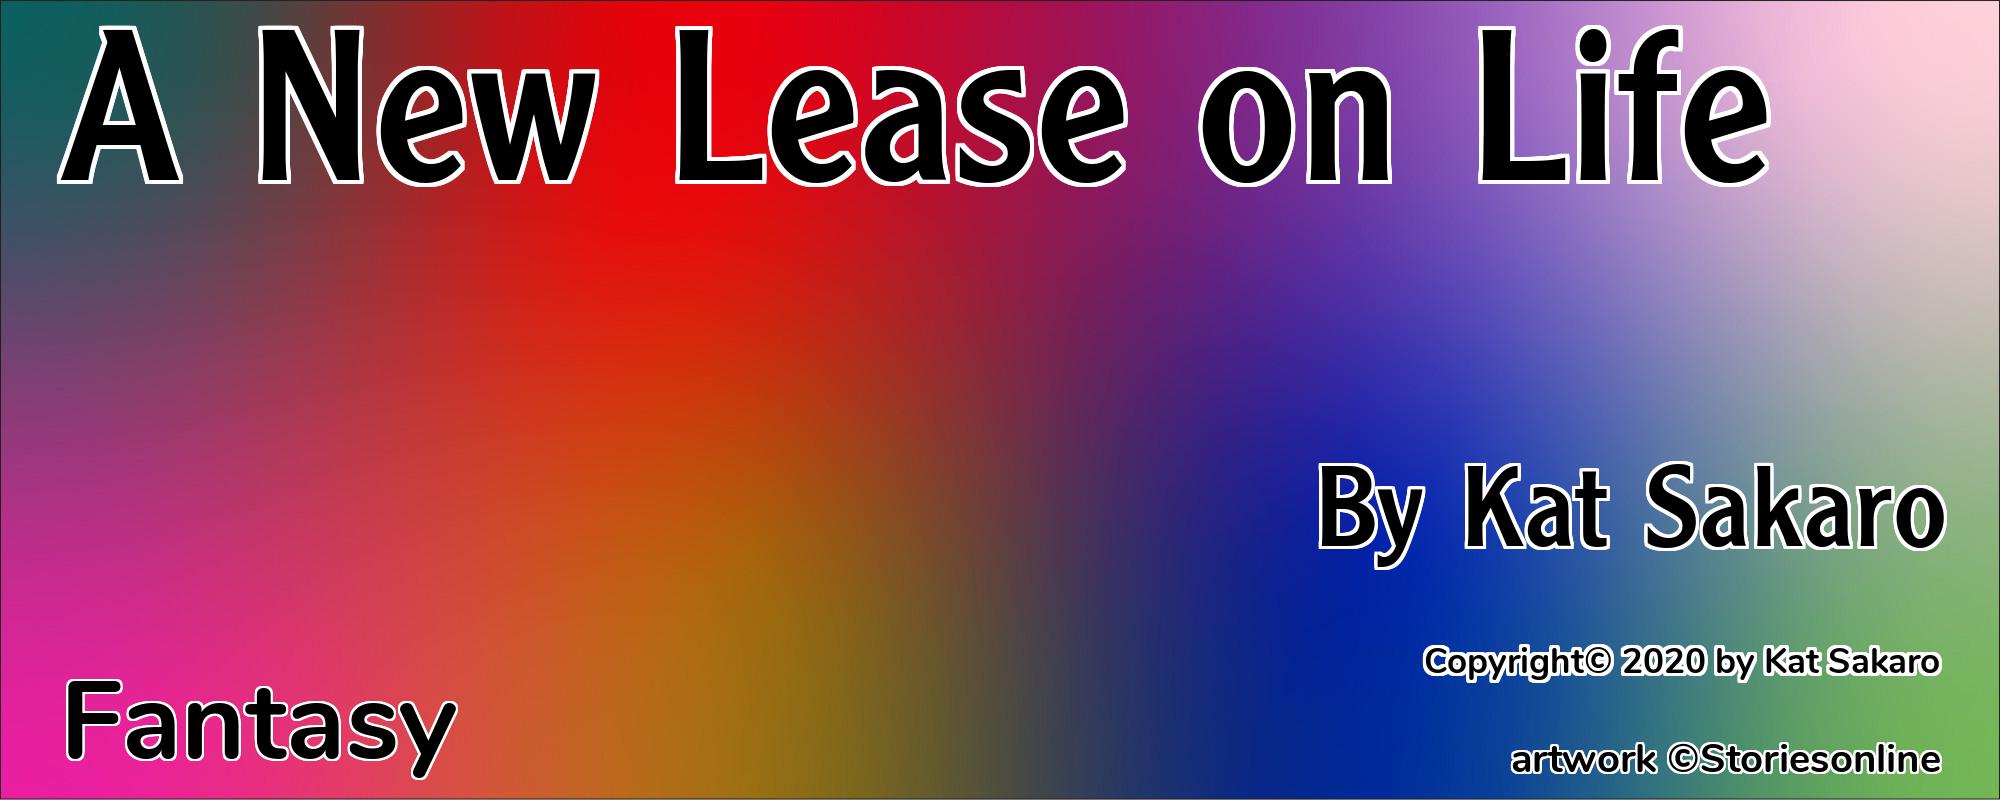 A New Lease on Life - Cover